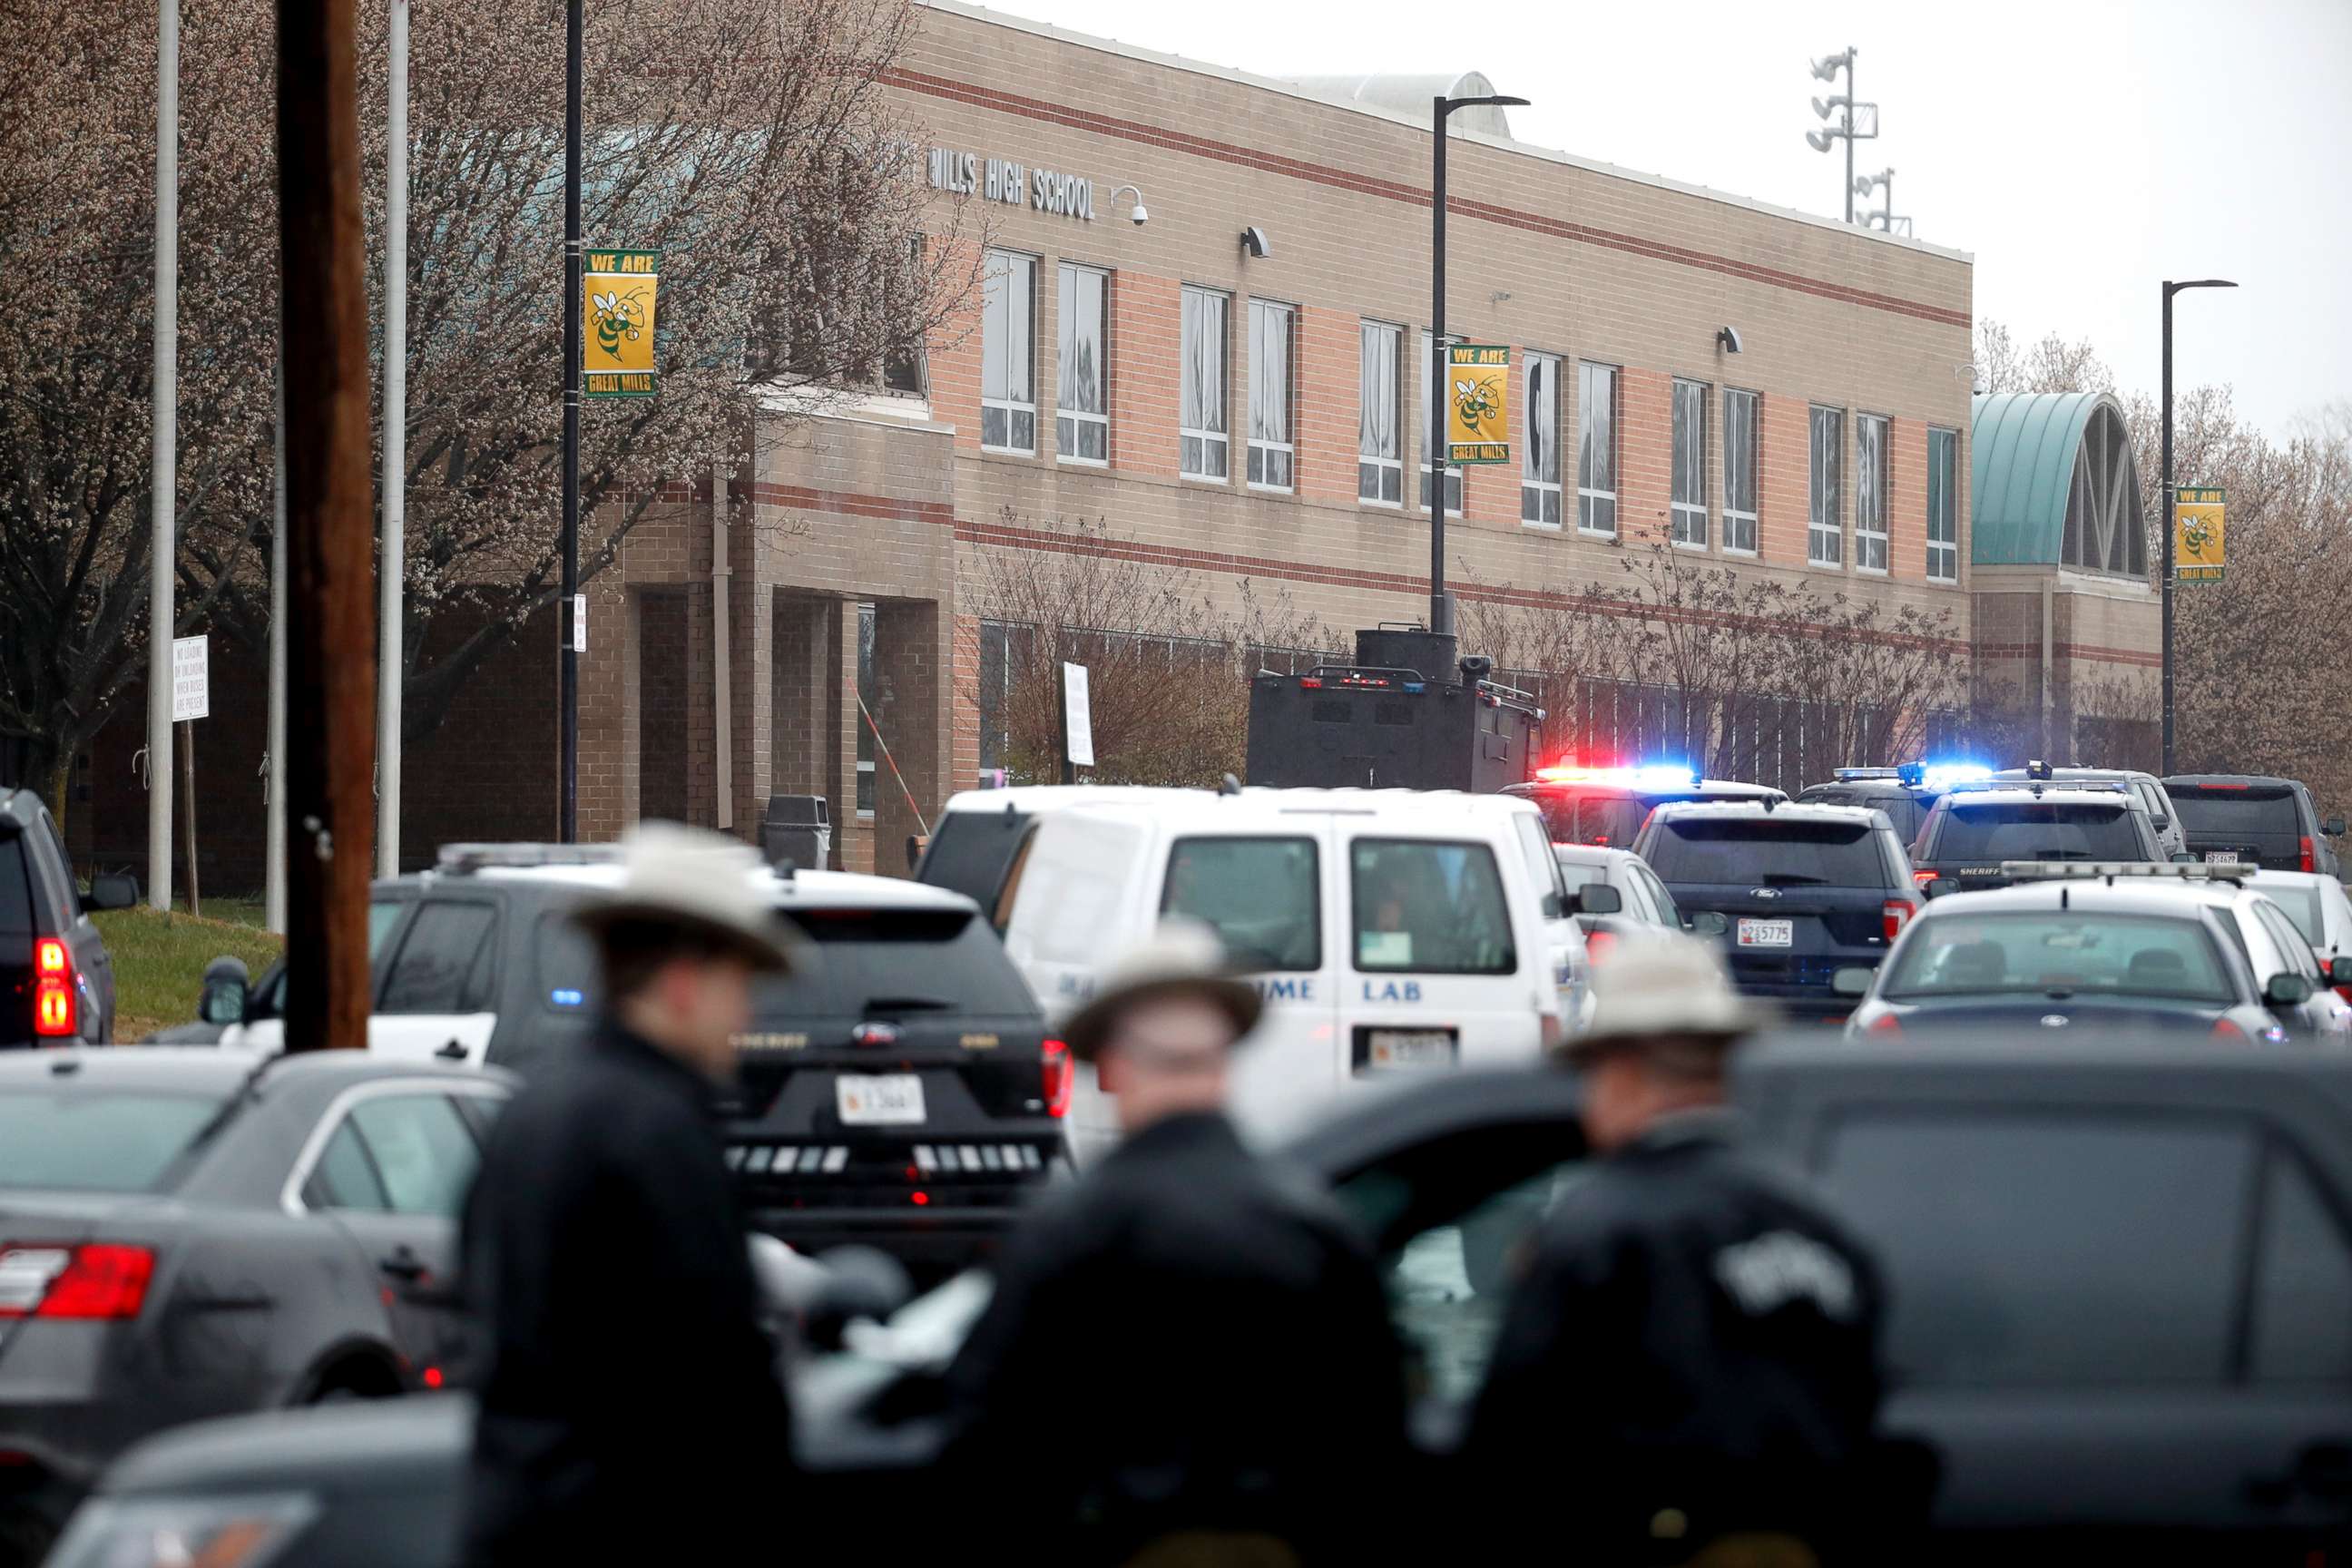 PHOTO: Deputies and federal agents converge on Great Mills High School, the scene of a shooting, March 20, 2018 in Great Mills, Md.